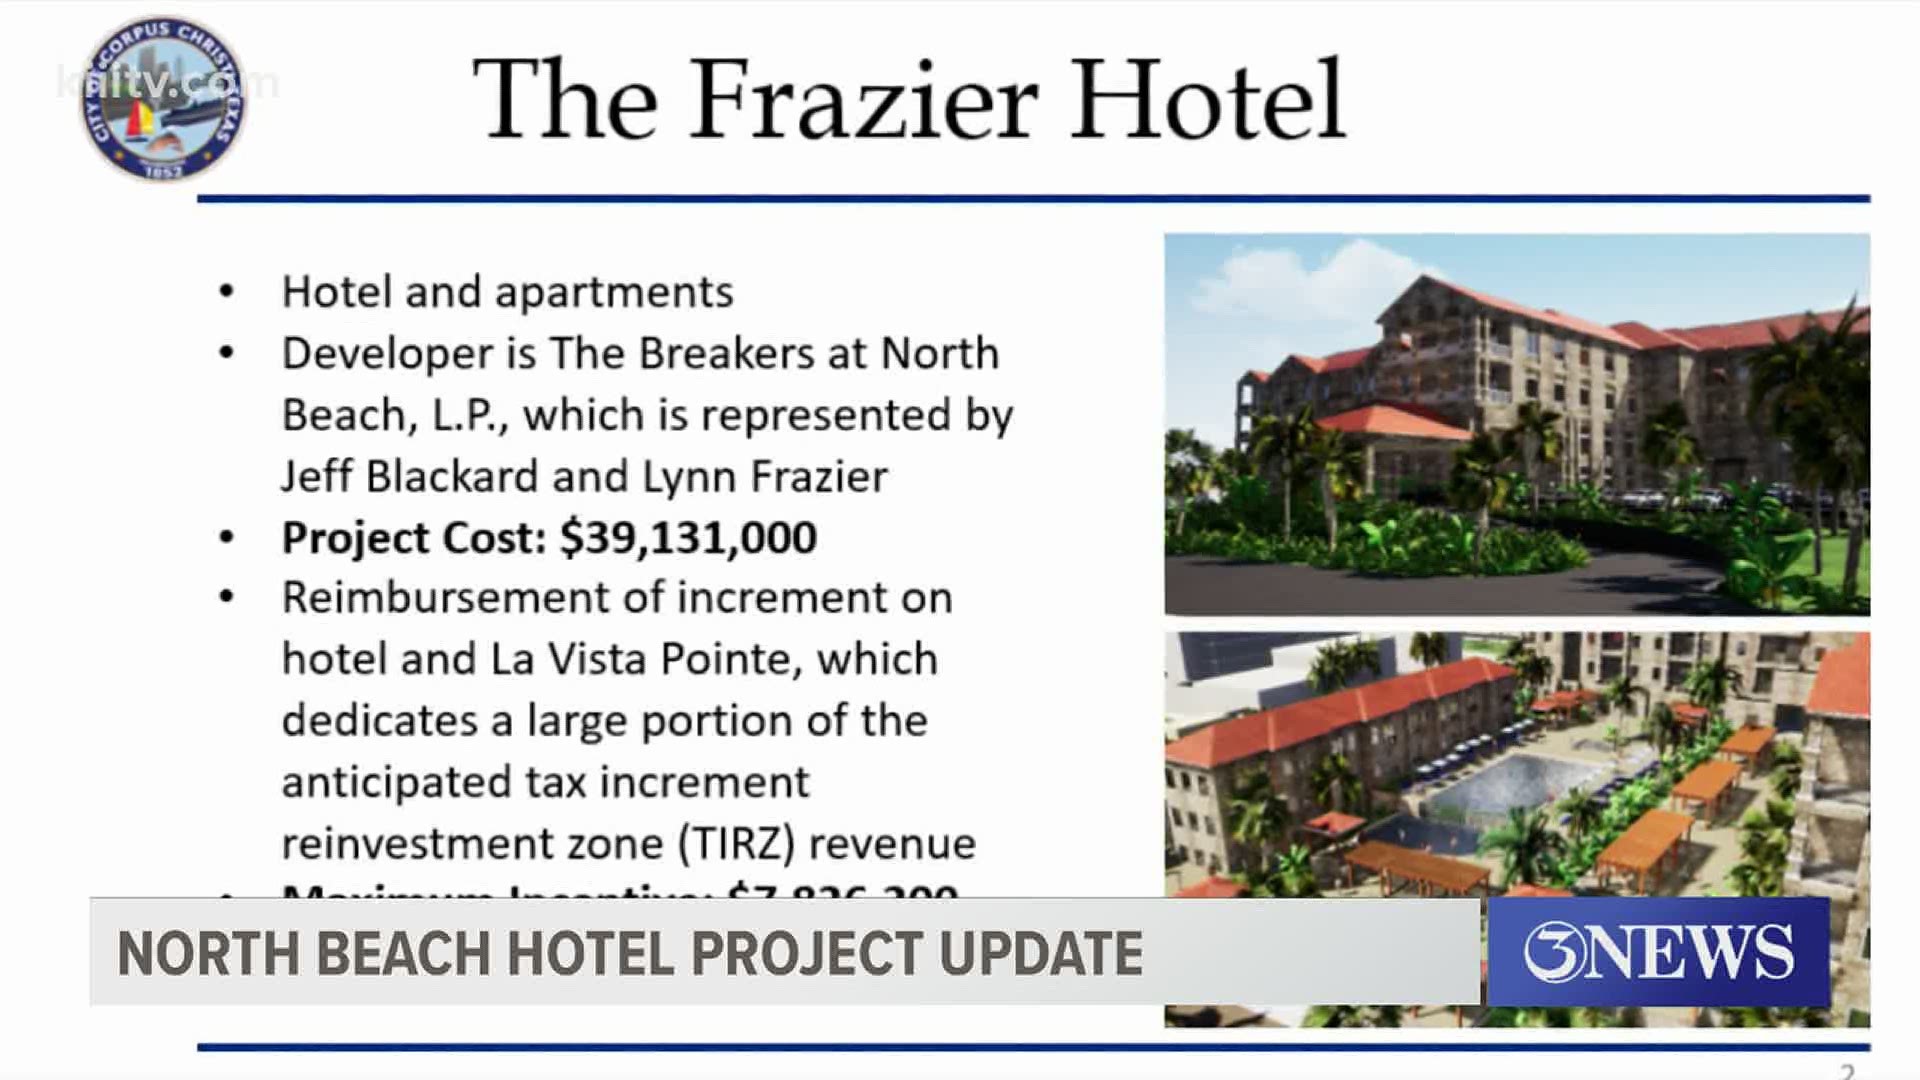 The Frazier Hotel is the latest multi-million dollar planned investment by developers Lynn Frazier and Jeff Blackard.